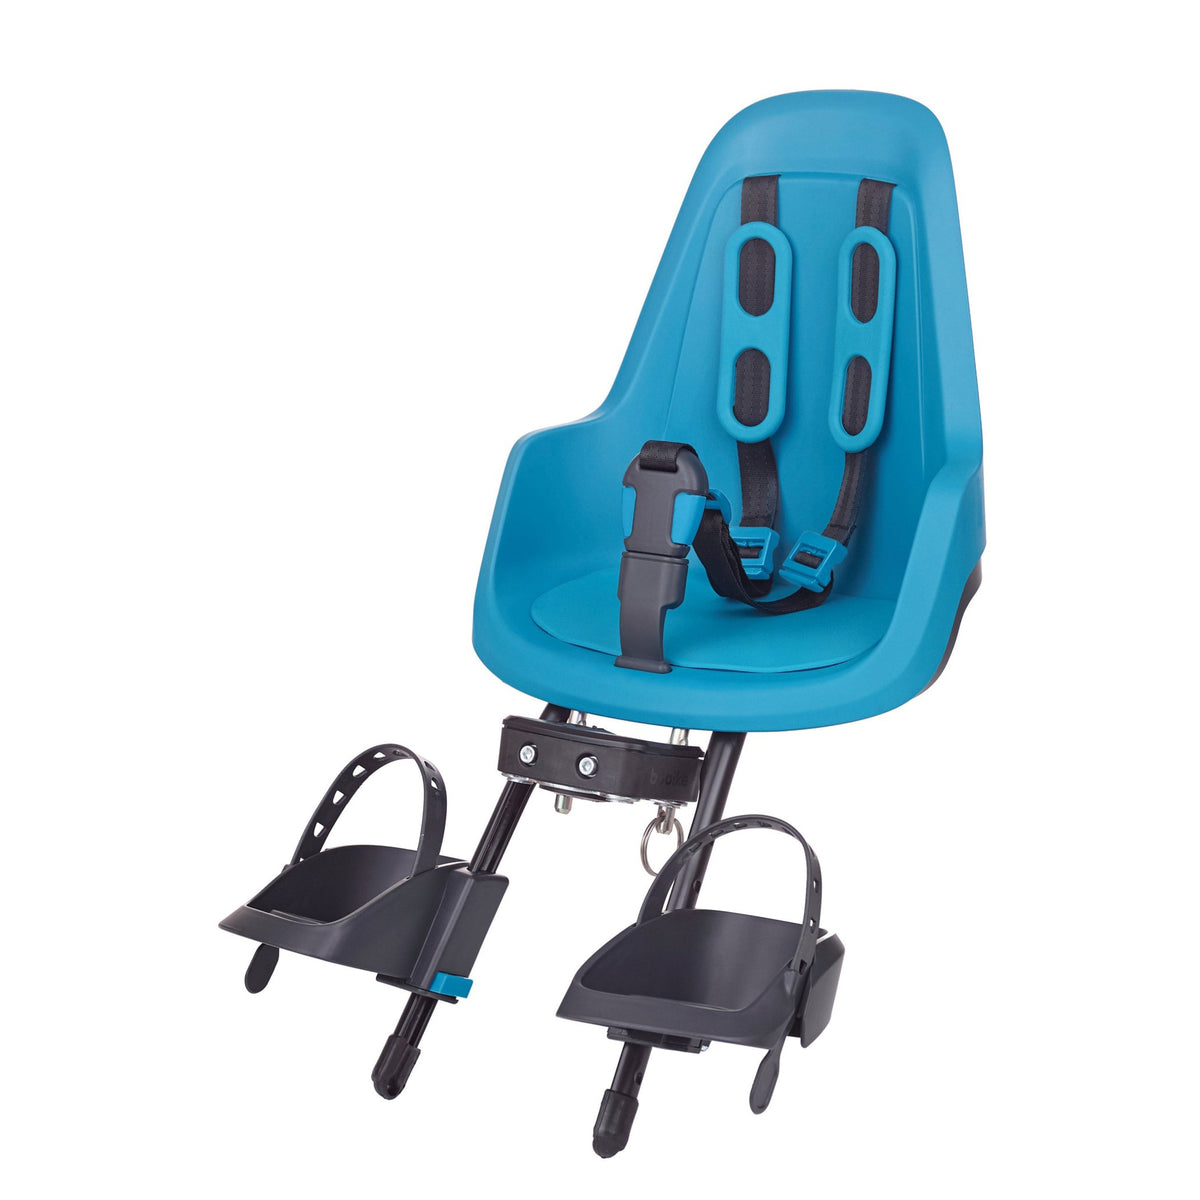 BoBike One Mini Front Mounted Child Seat | Child Bike Seat for Kids Ages 8 Months to 3 Years